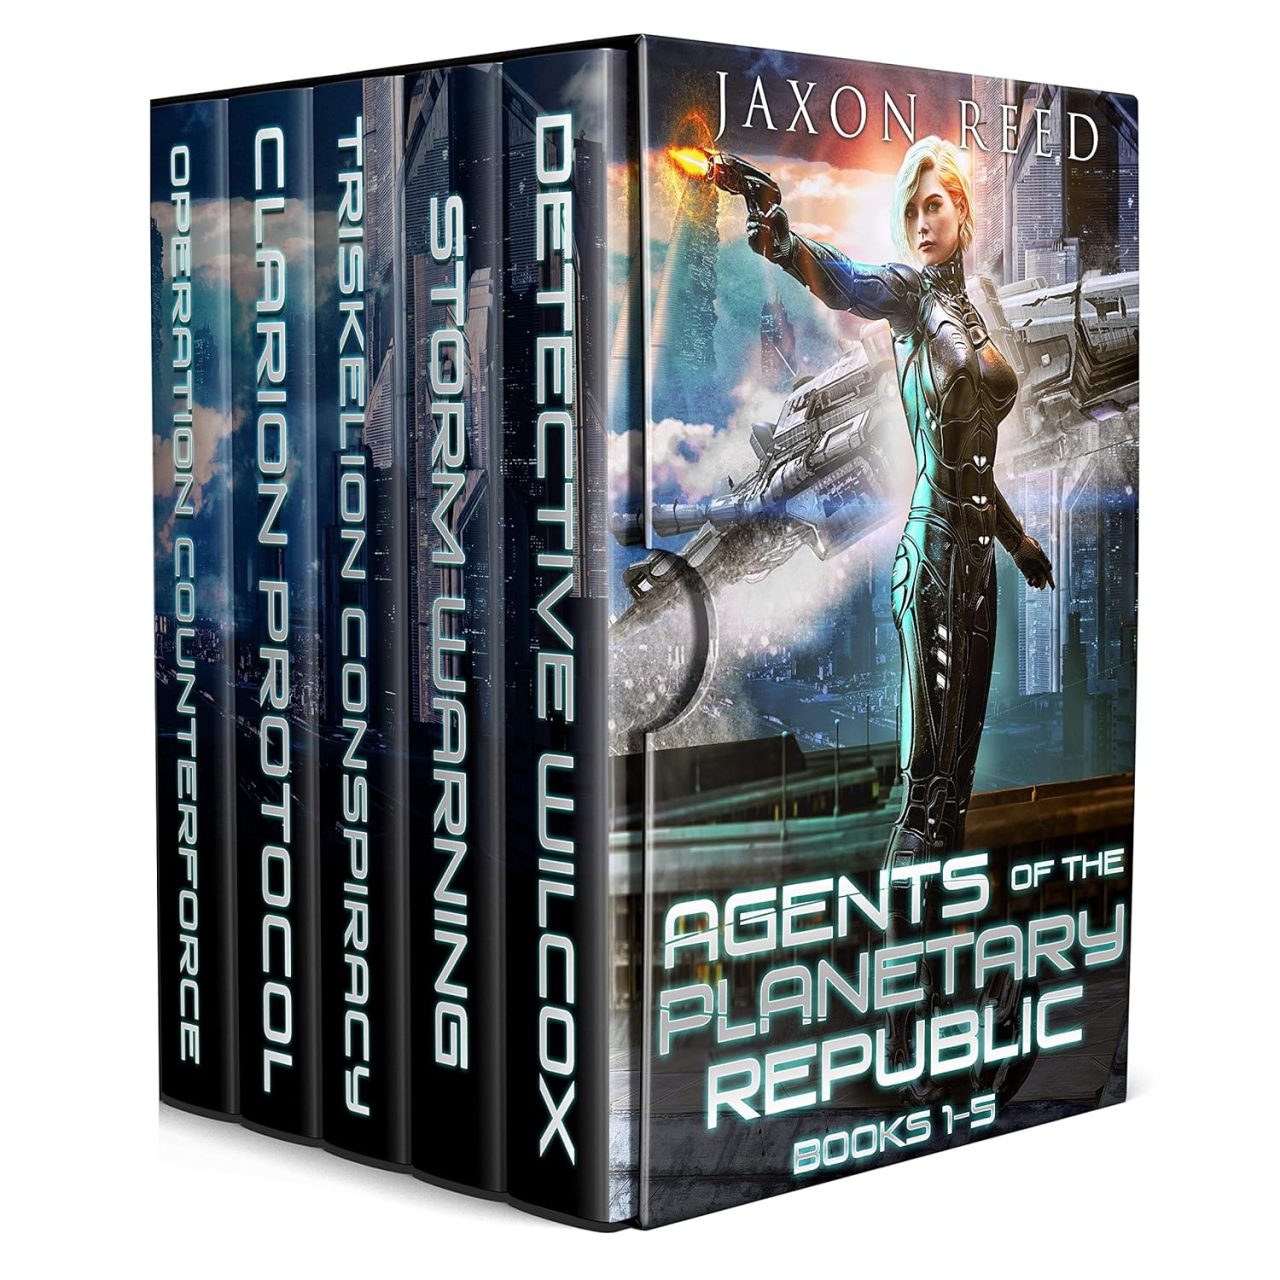 Agents of the Planetary Republic Books 1-5